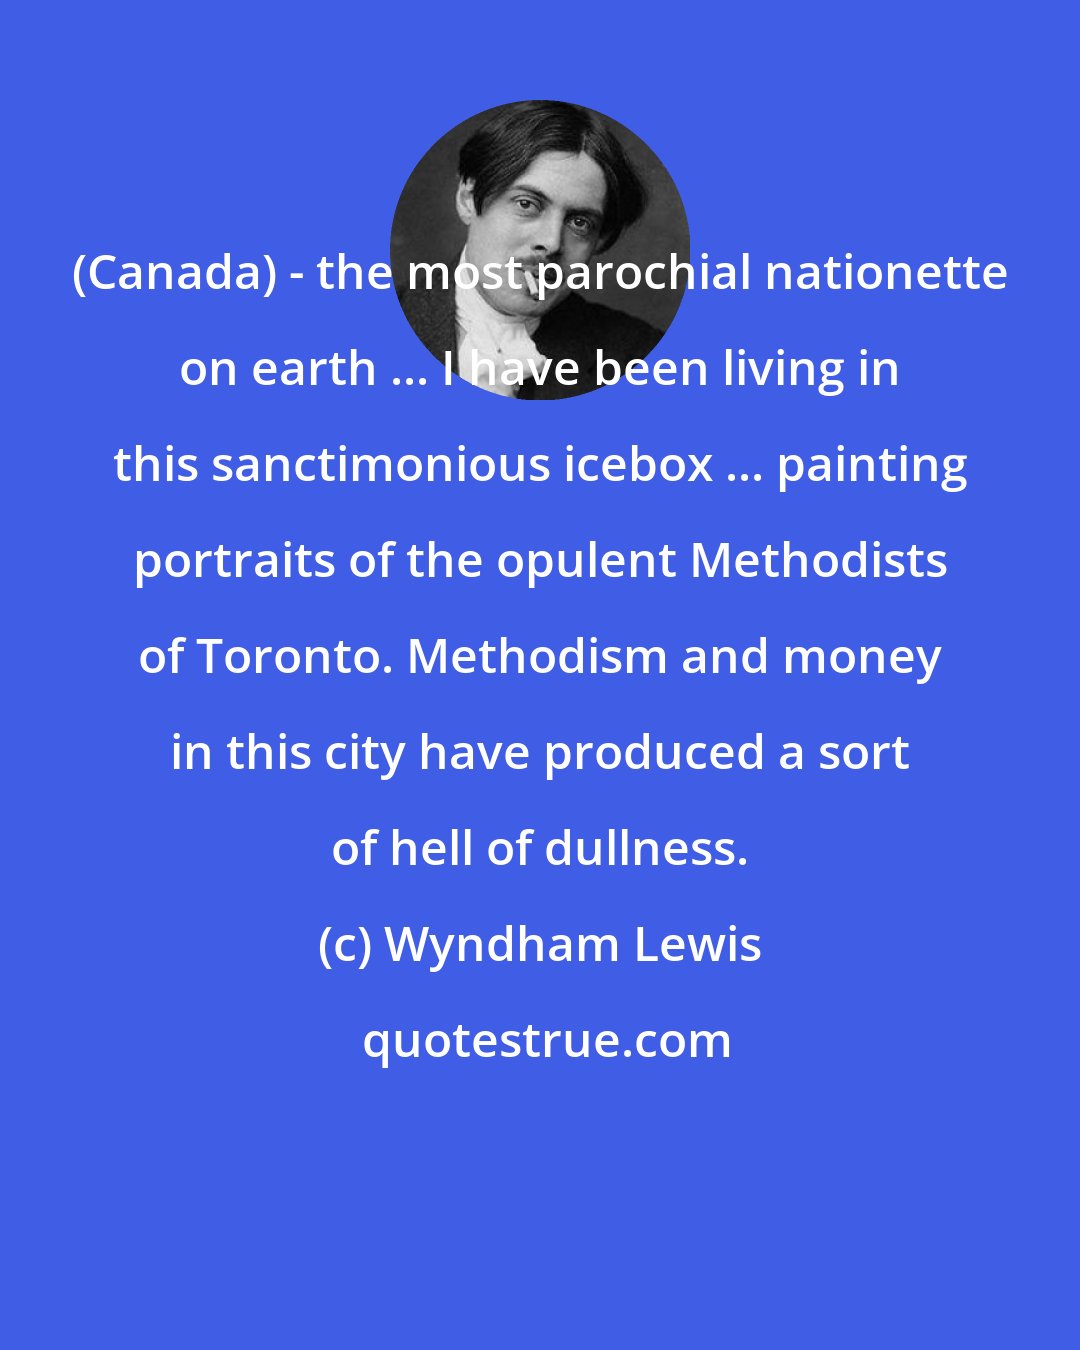 Wyndham Lewis: (Canada) - the most parochial nationette on earth ... I have been living in this sanctimonious icebox ... painting portraits of the opulent Methodists of Toronto. Methodism and money in this city have produced a sort of hell of dullness.